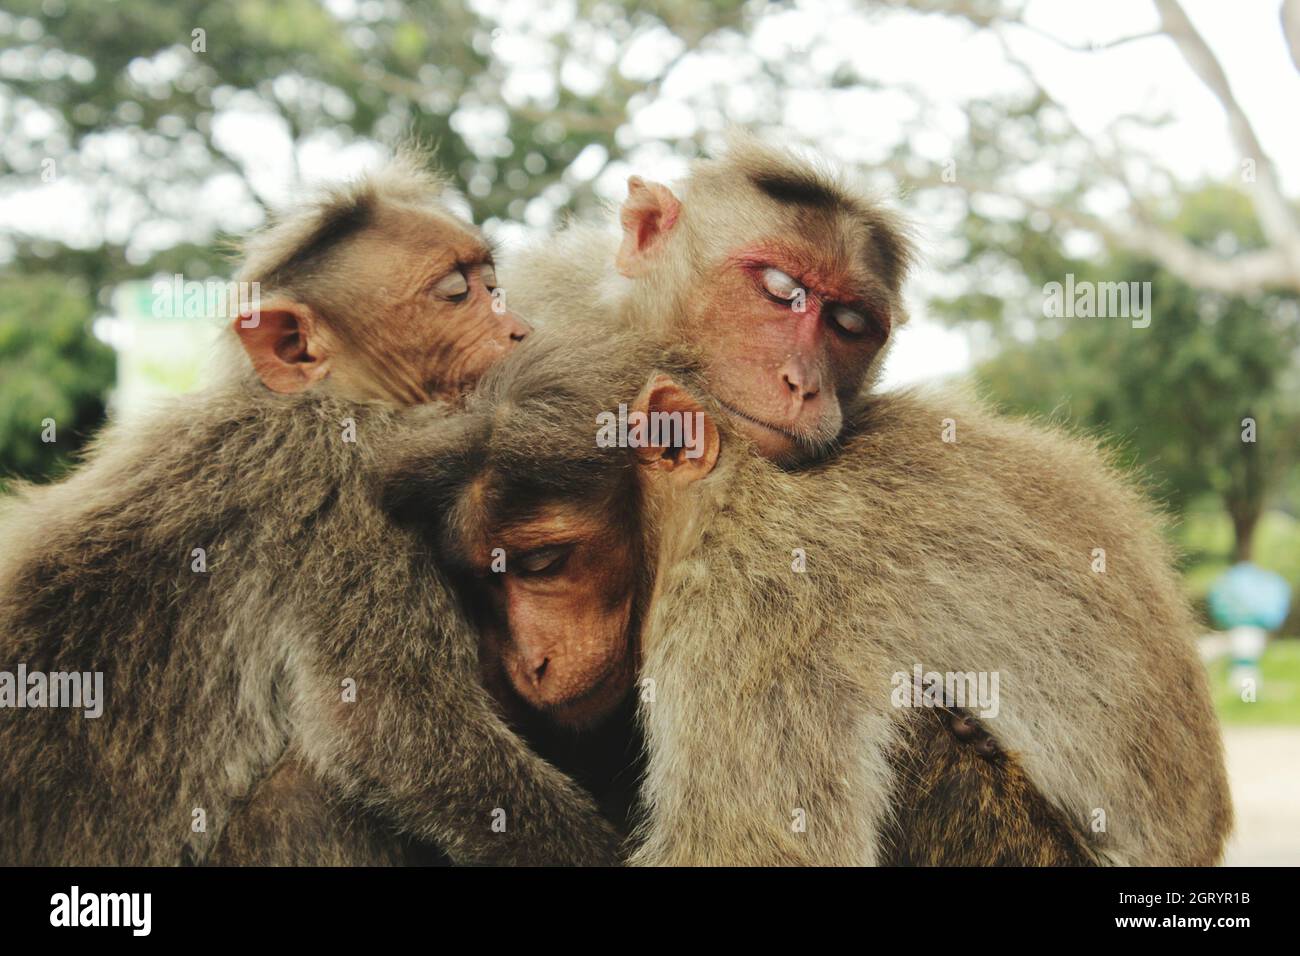 Even Animal Understand That When Situation Is Tough, Only Family Or Friends Wil Be There To Help. Stock Photo